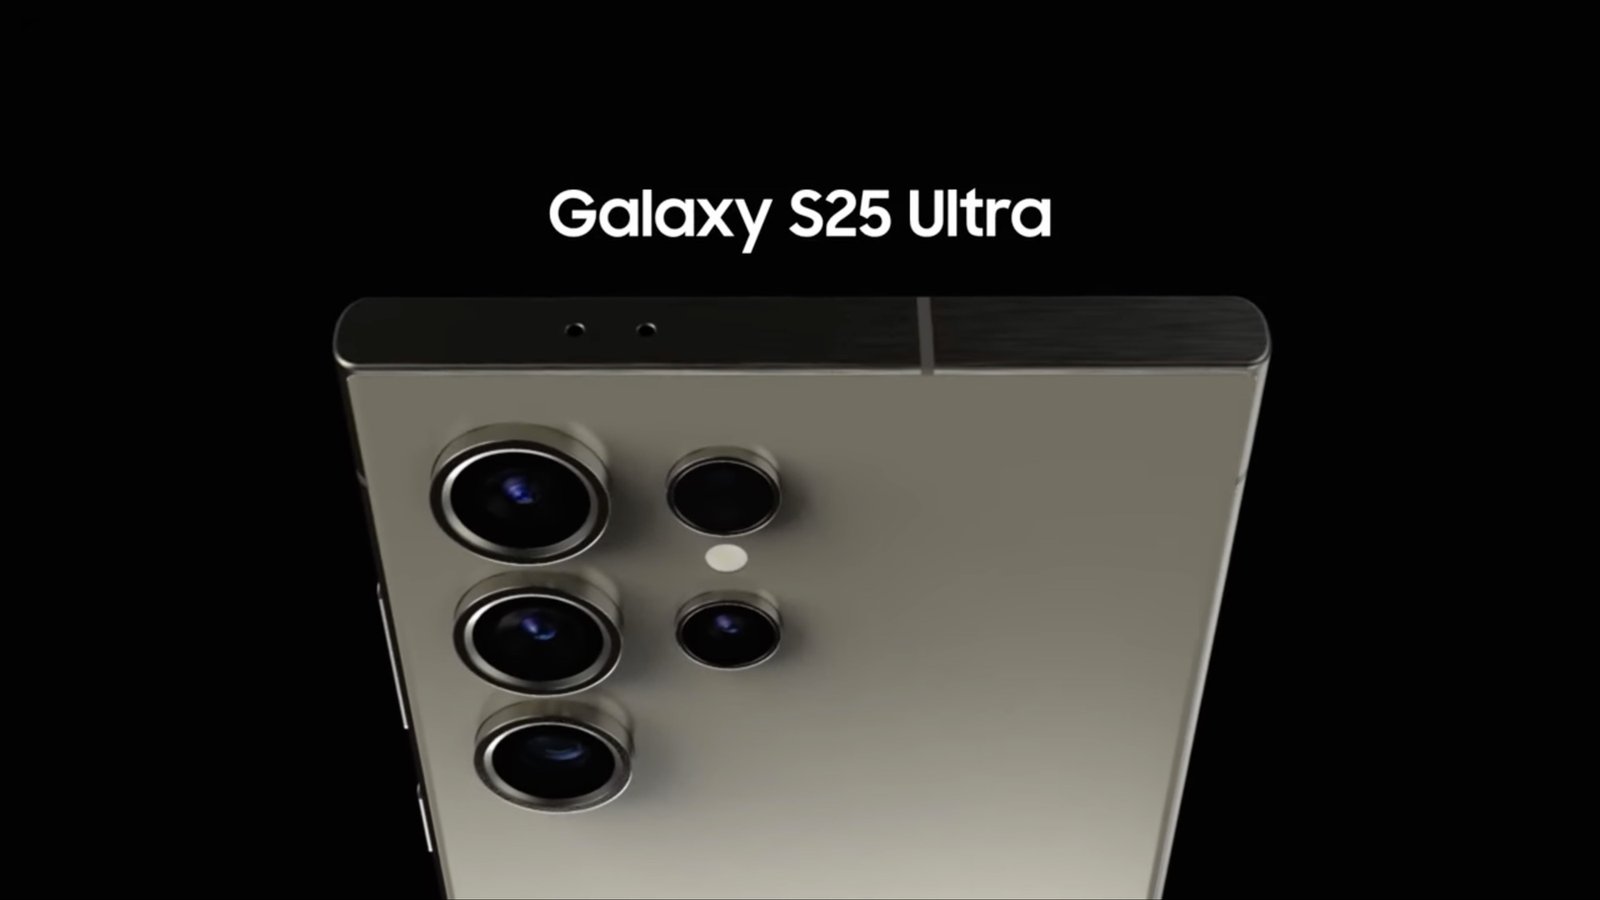 Samsung to Upgrade Two Cameras in the Galaxy S25 Ultra